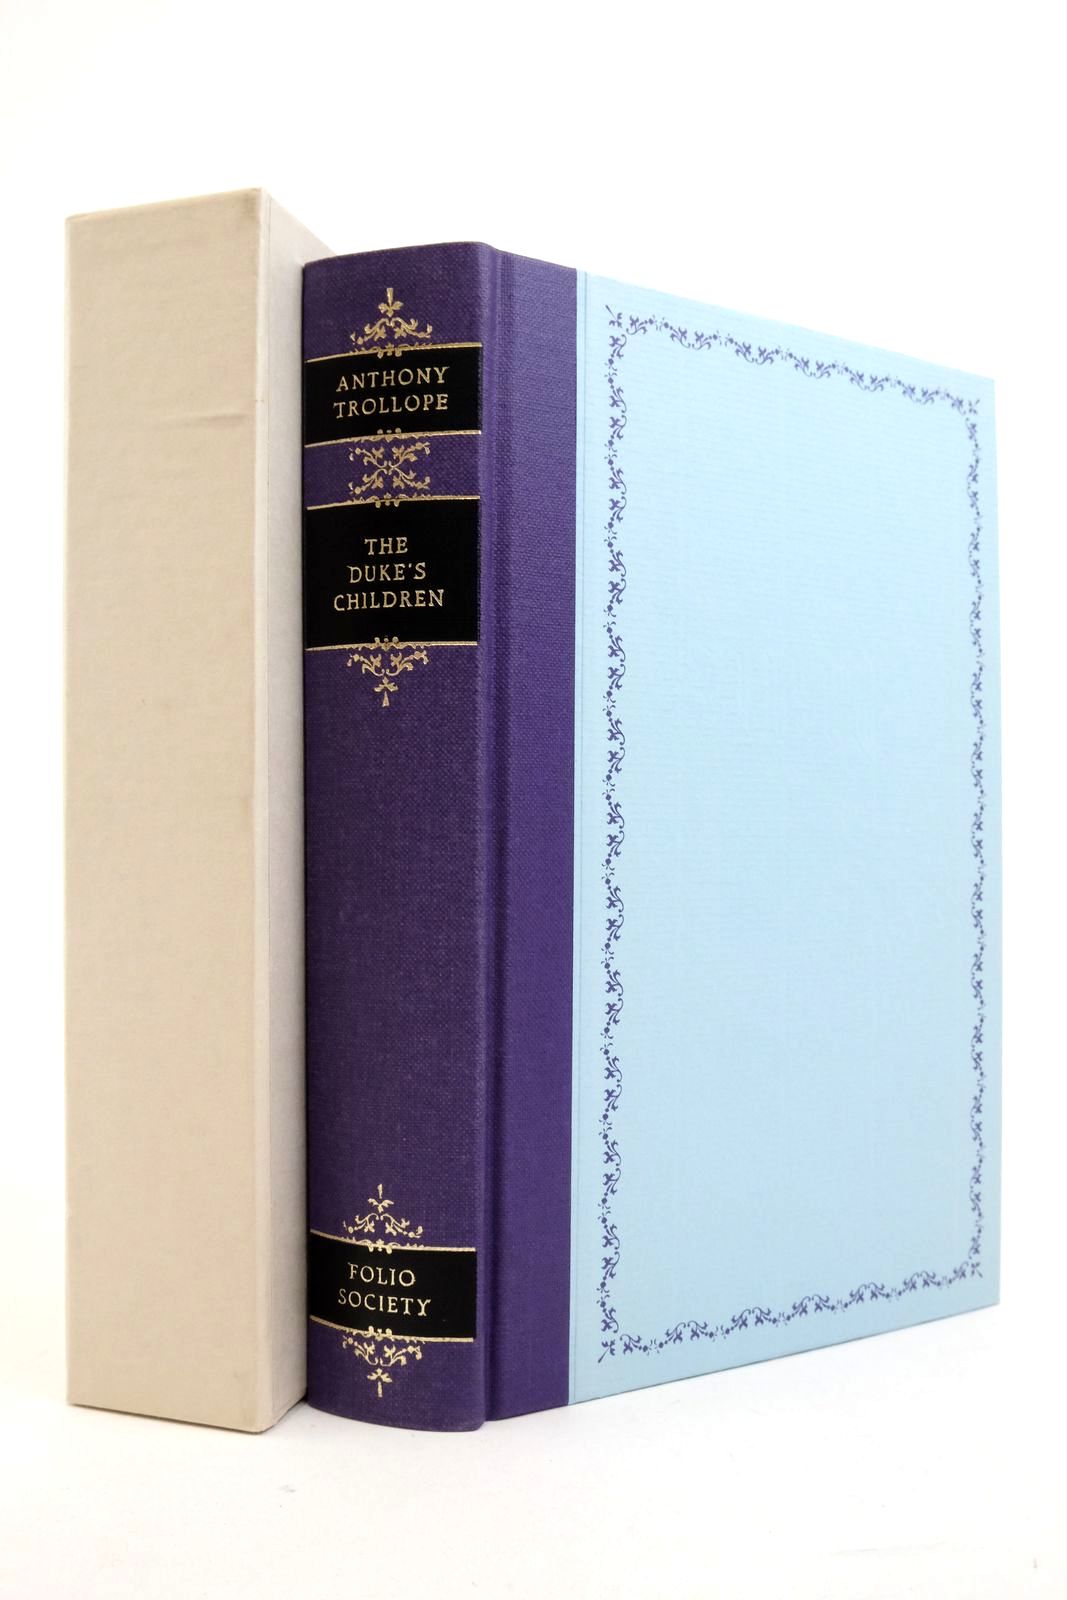 Photo of THE DUKE'S CHILDREN written by Trollope, Anthony Jenkins, Roy illustrated by Thomas, Llewellyn published by Folio Society (STOCK CODE: 2138316)  for sale by Stella & Rose's Books